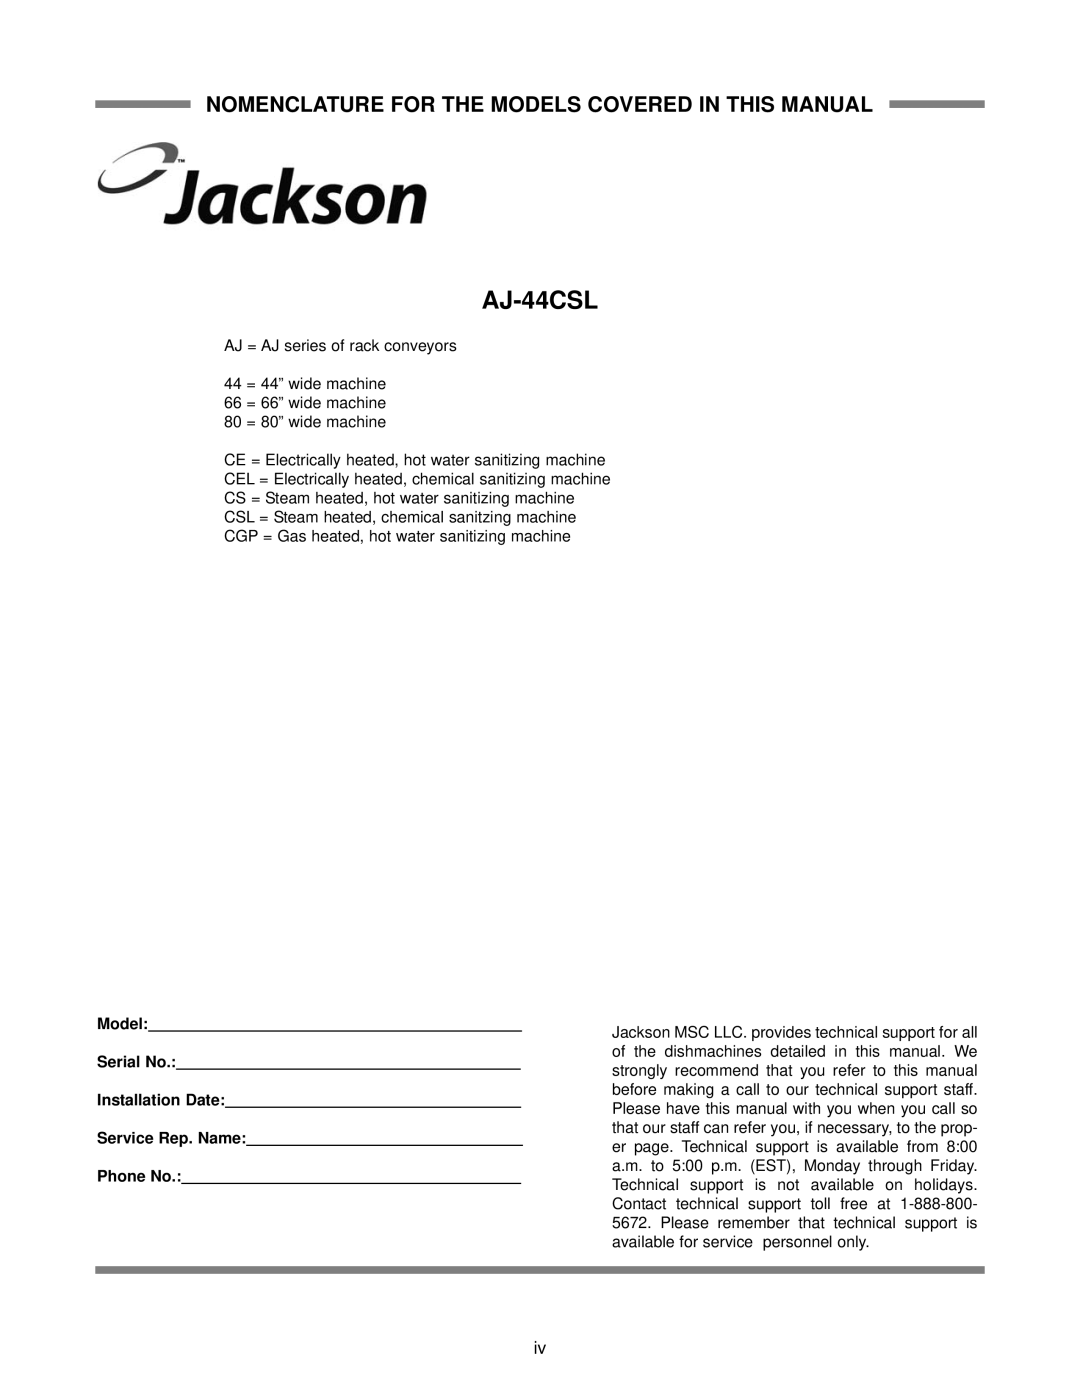 Jackson technical manual Nomenclature For The Models Covered In This Manual, AJ-44CSL 